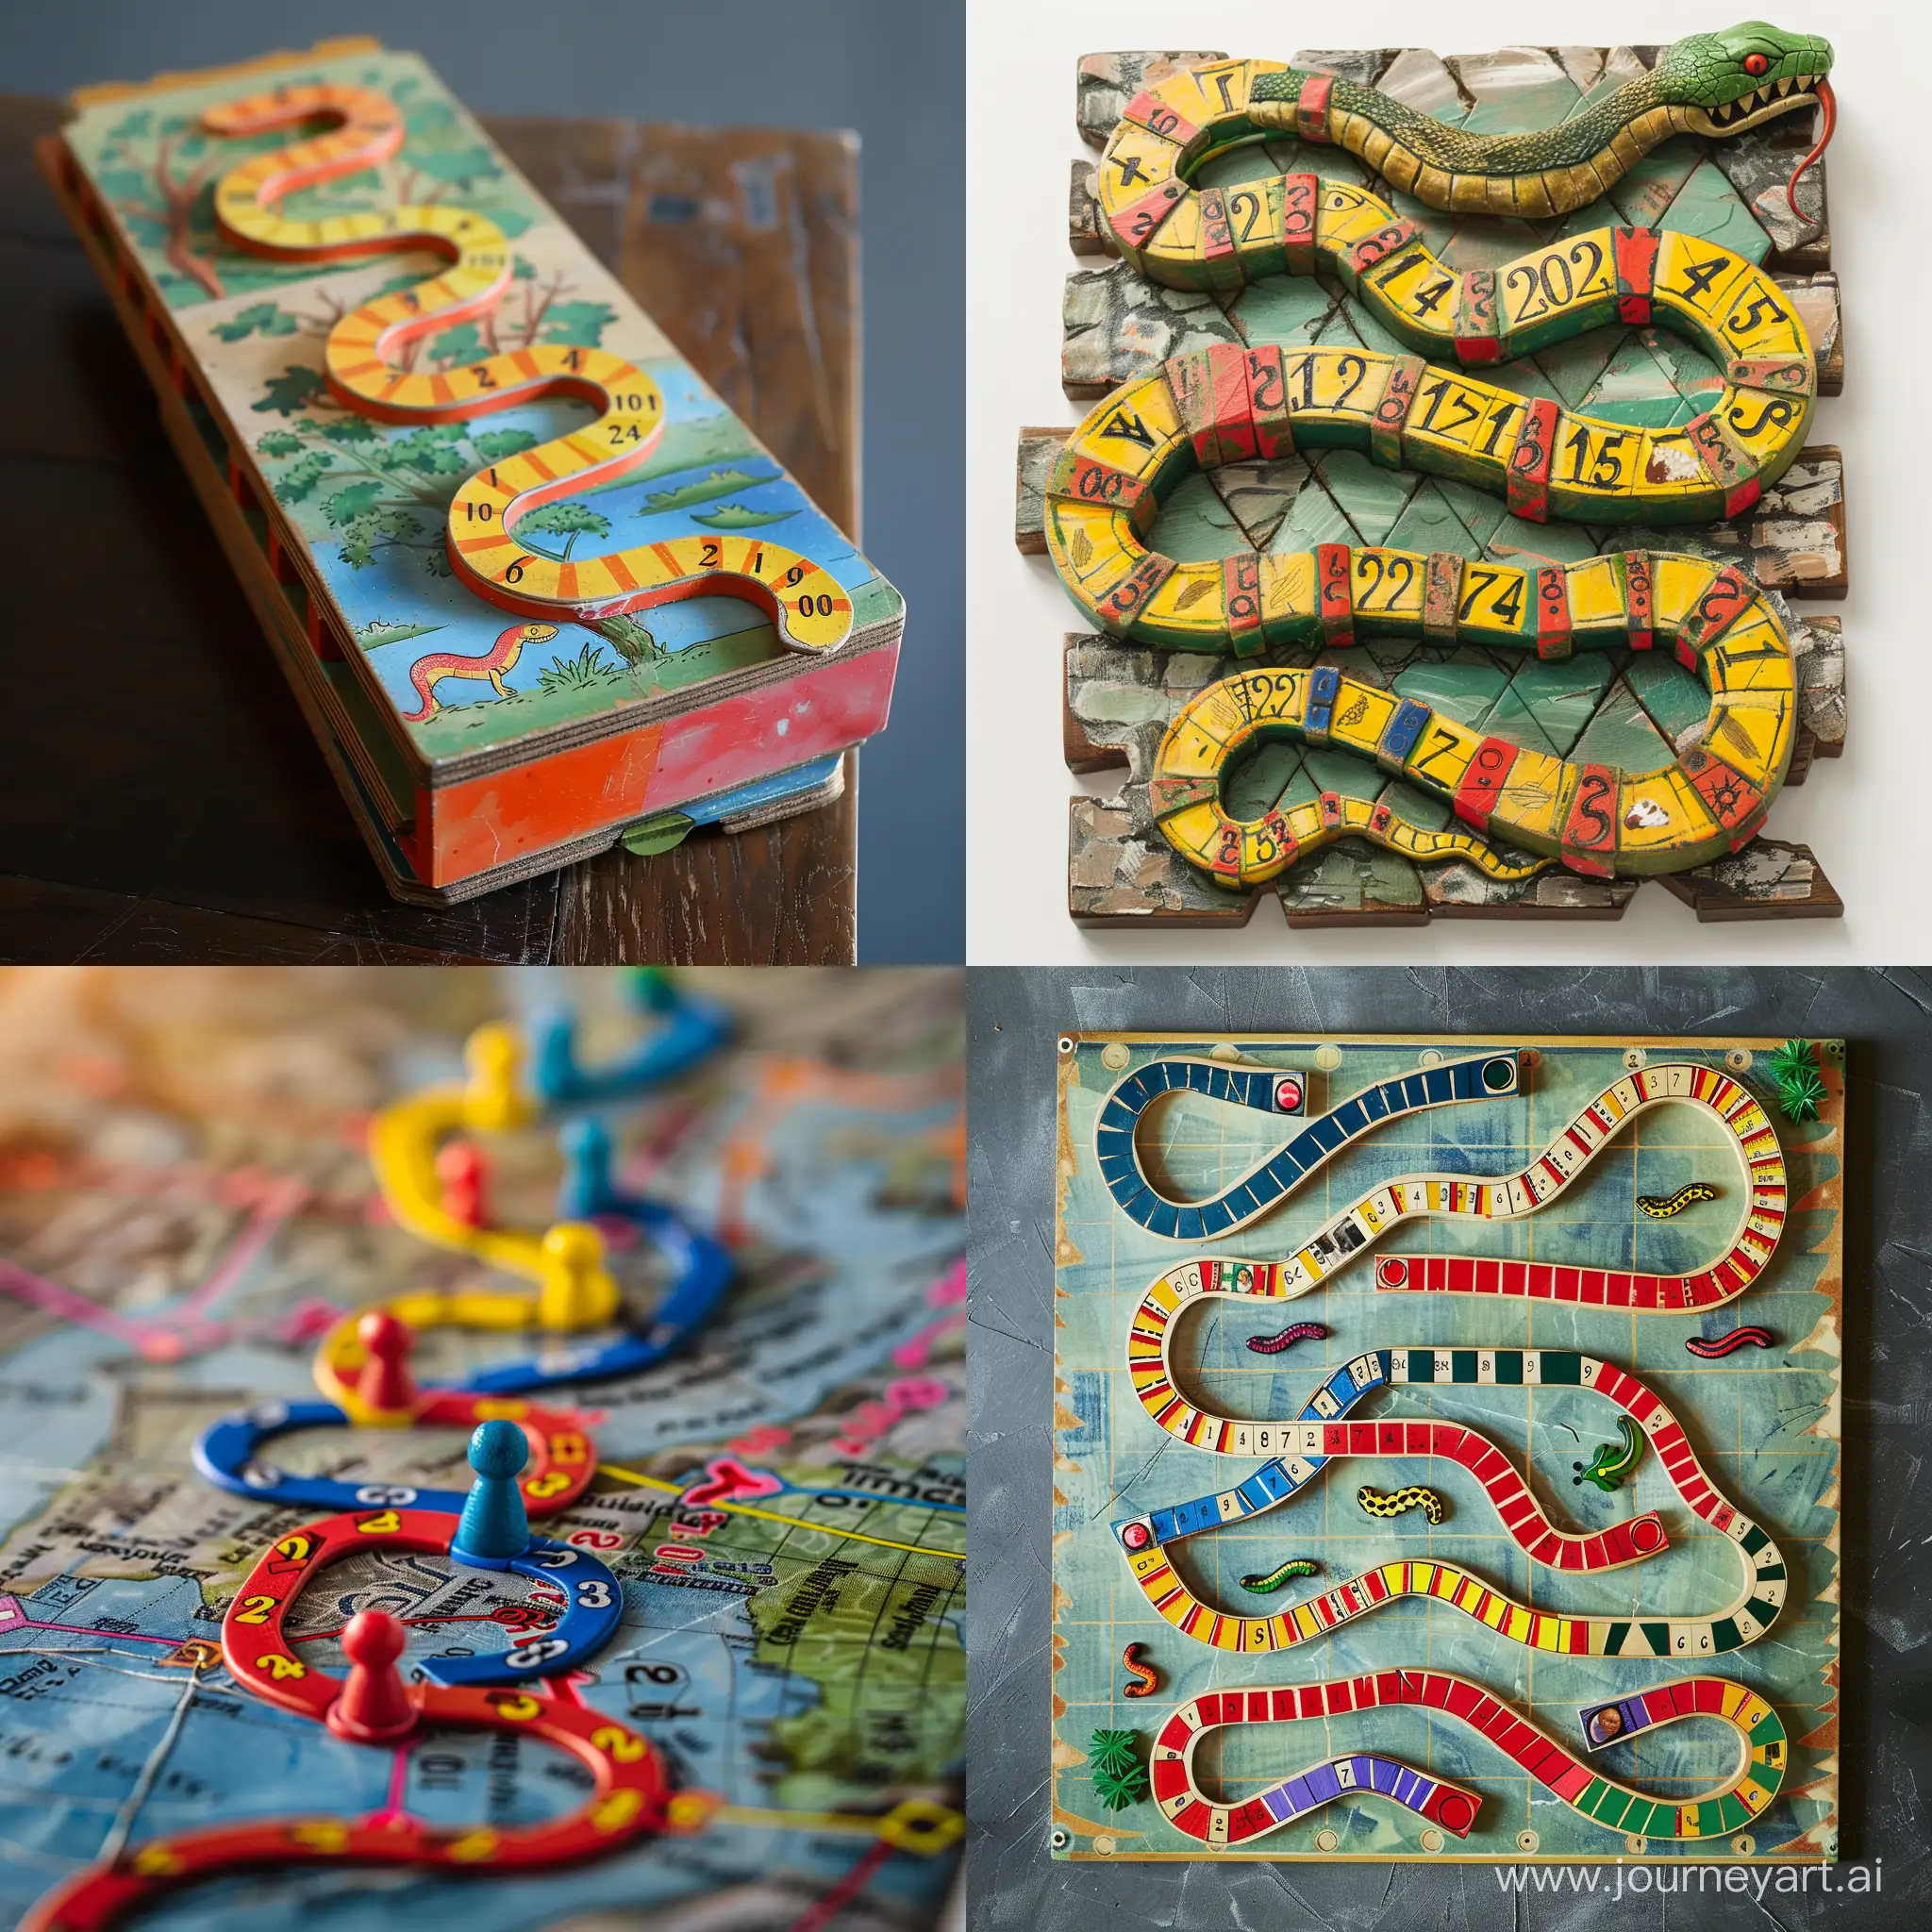 A game of ladders and snakes by years from 1984 to 2024